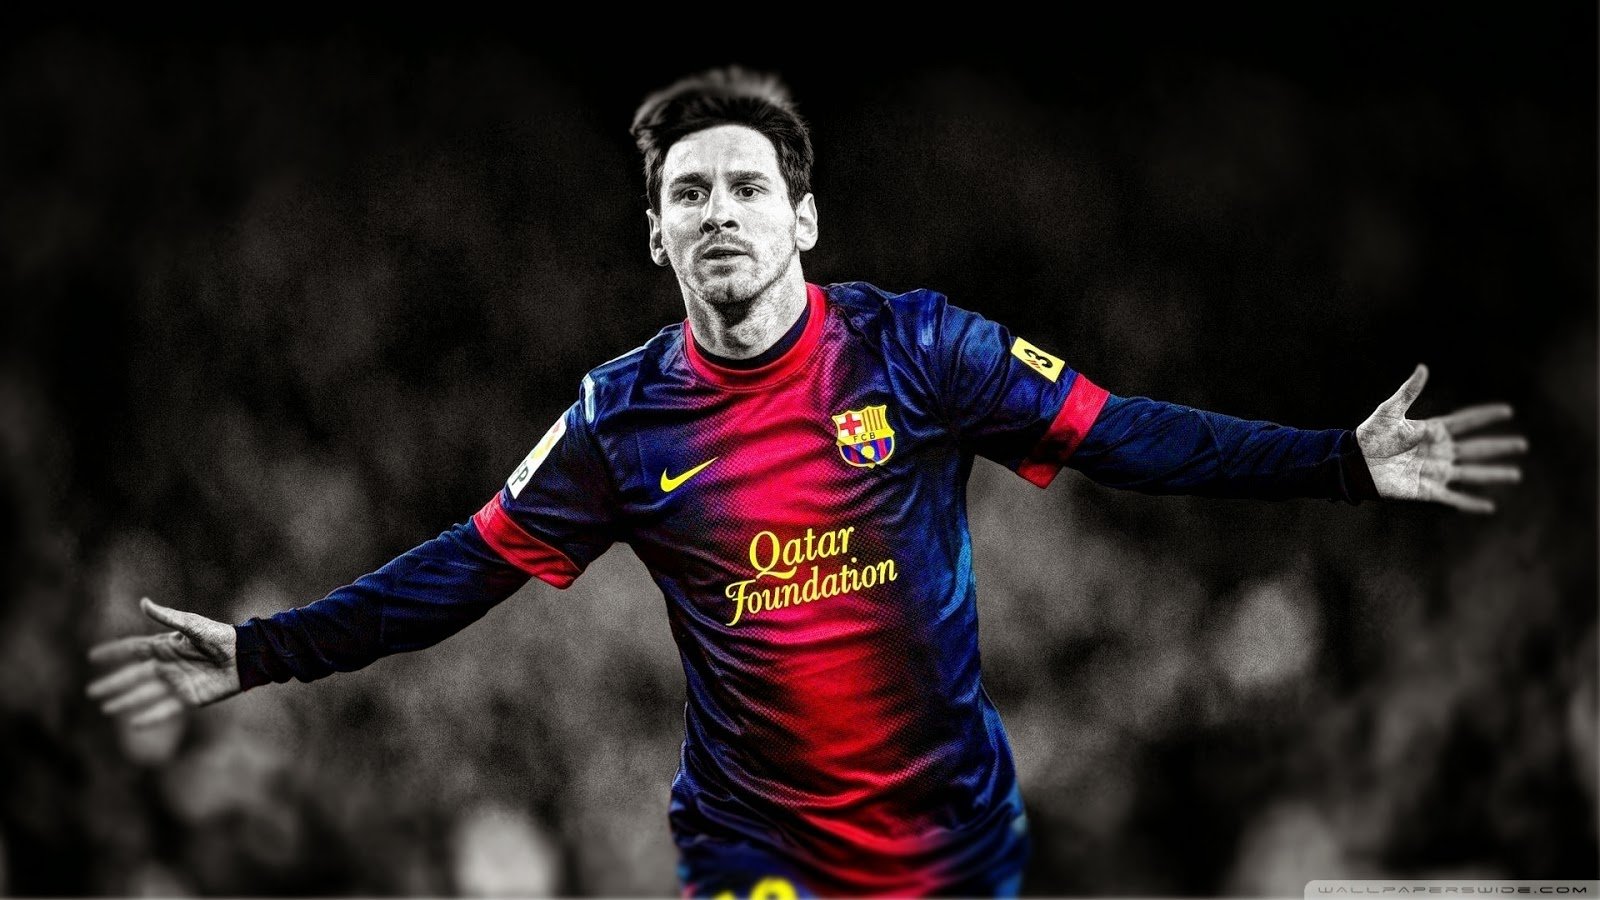 lionel2Bmessi2Bwallpaper Top 10 Lionel Messi 2015 Wallpapers 1600x900